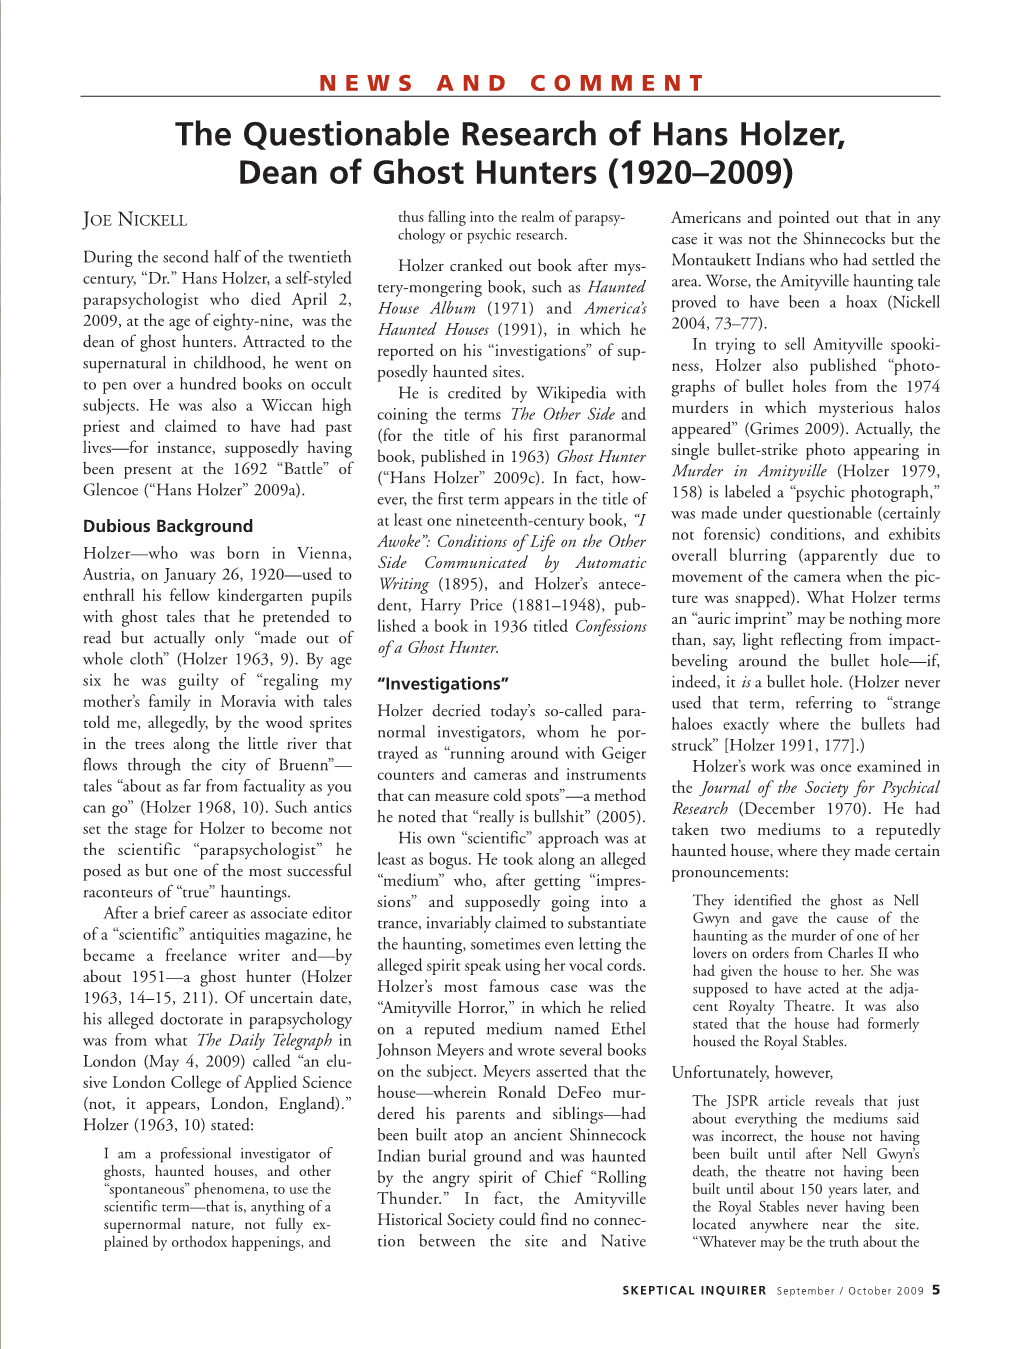 The Questionable Research of Hans Holzer, Dean of Ghost Hunters (1920–2009)